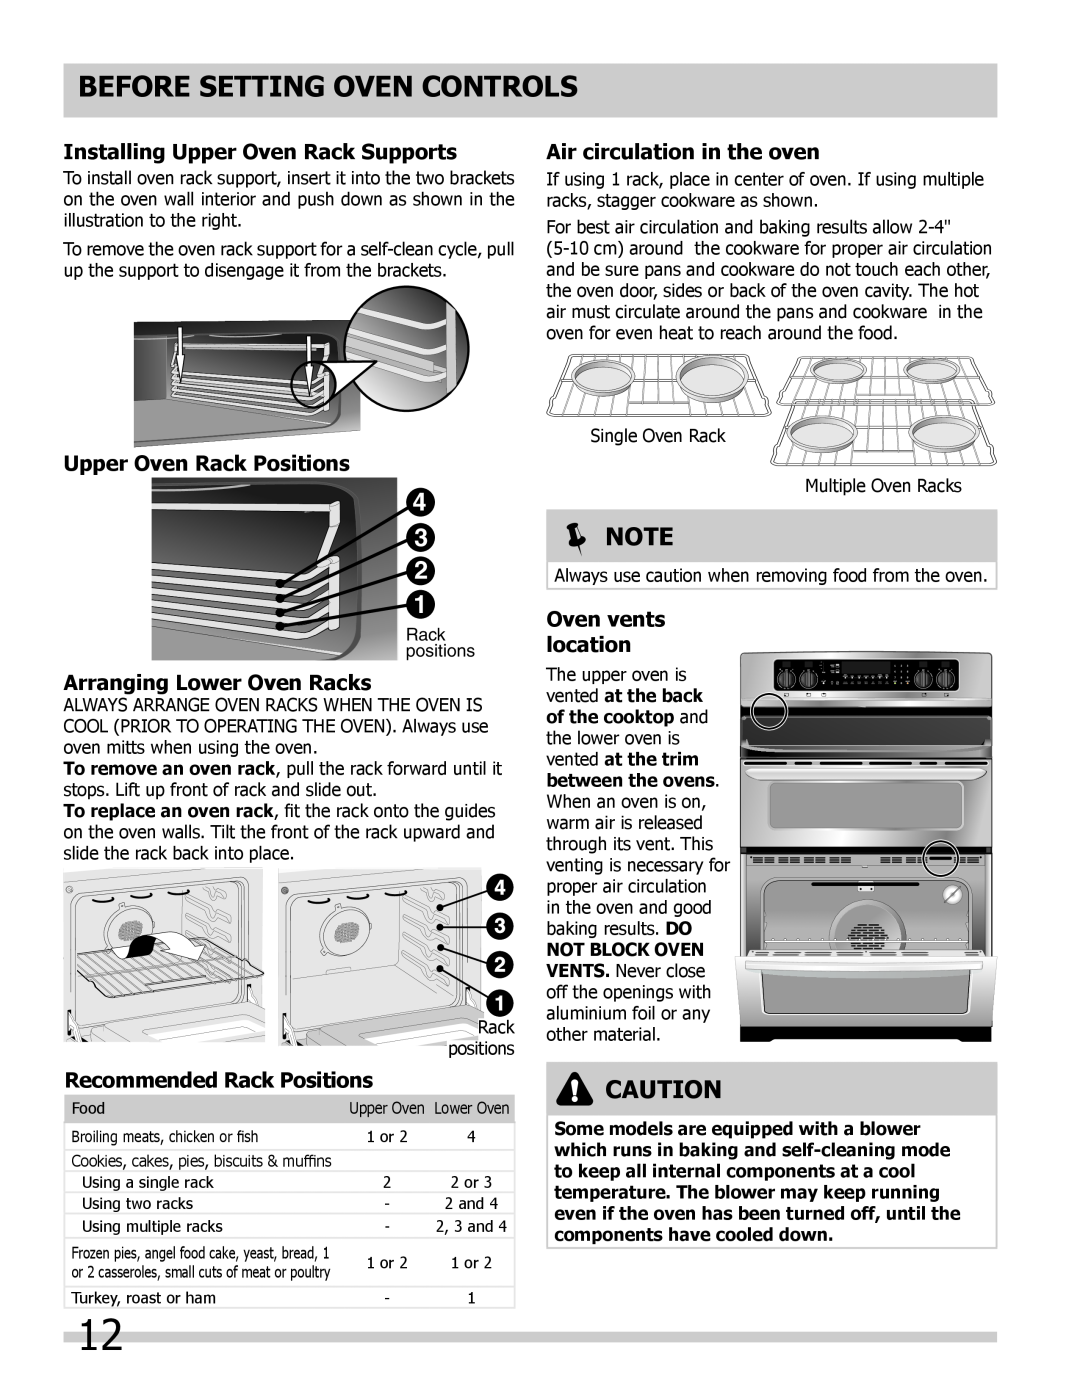 Frigidaire 318205204 Before Setting Oven Controls, Installing Upper Oven Rack Supports, Upper Oven Rack Positions, Note 